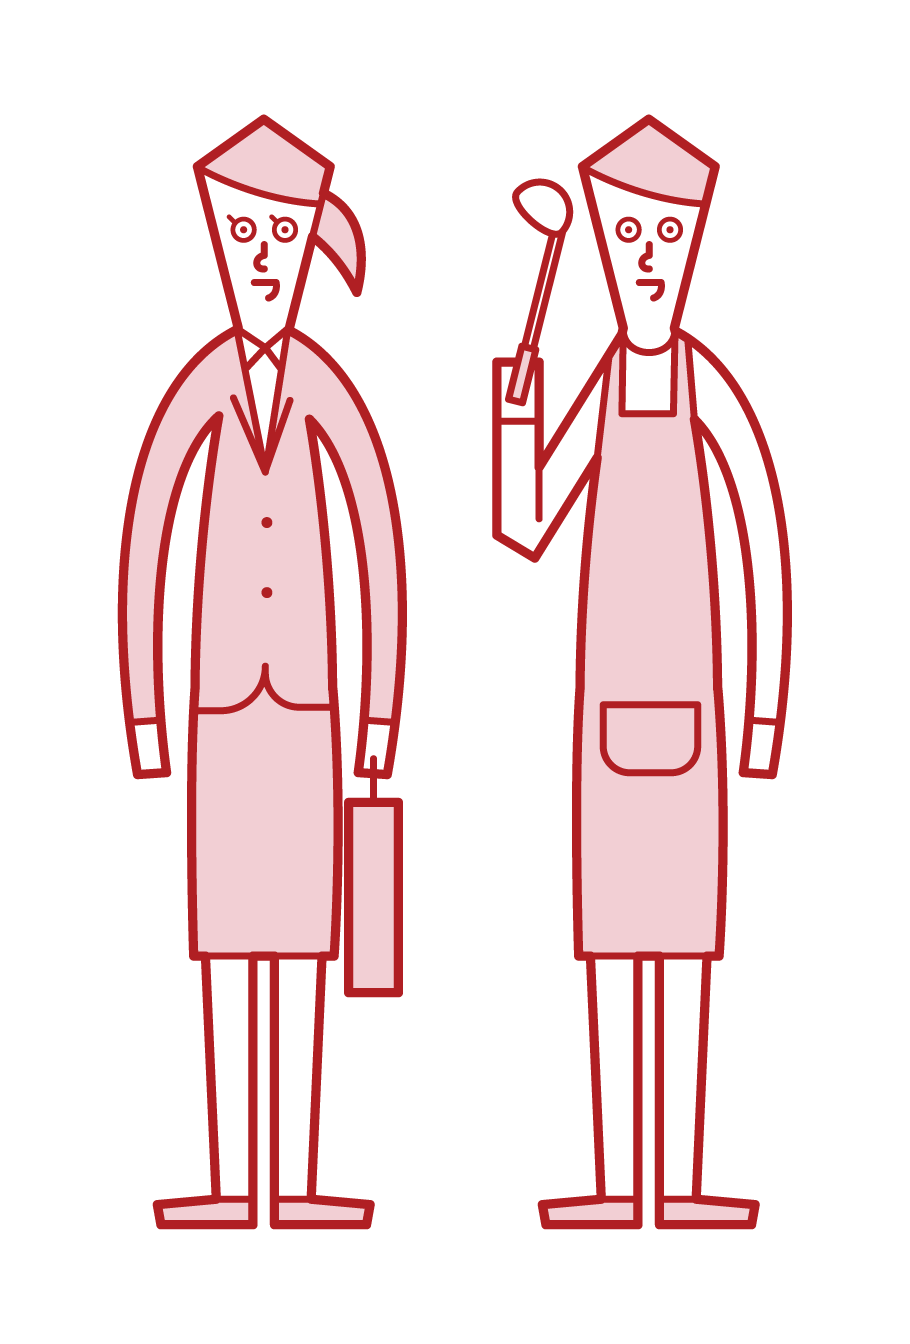 Illustration of wife of full-time husband (man) and office worker (woman)